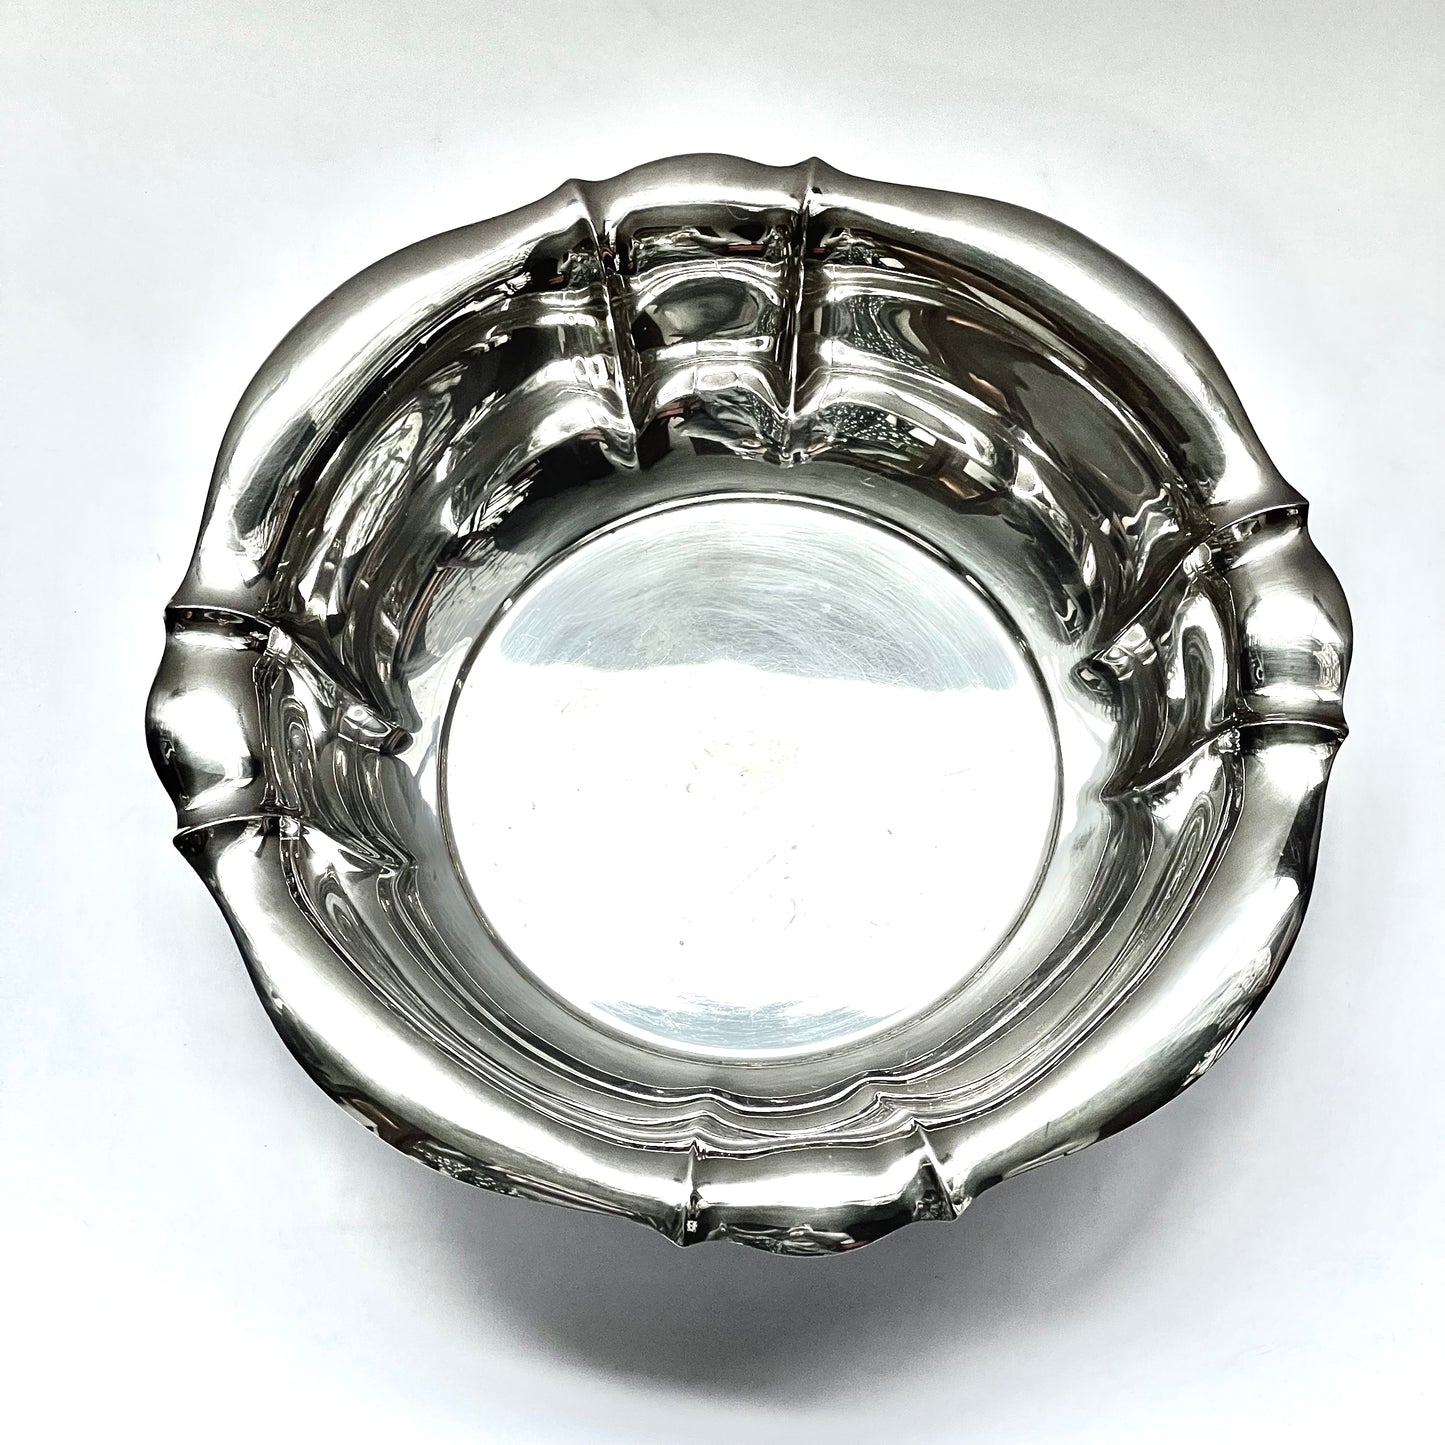 Early 20th century Continental European silver bowl